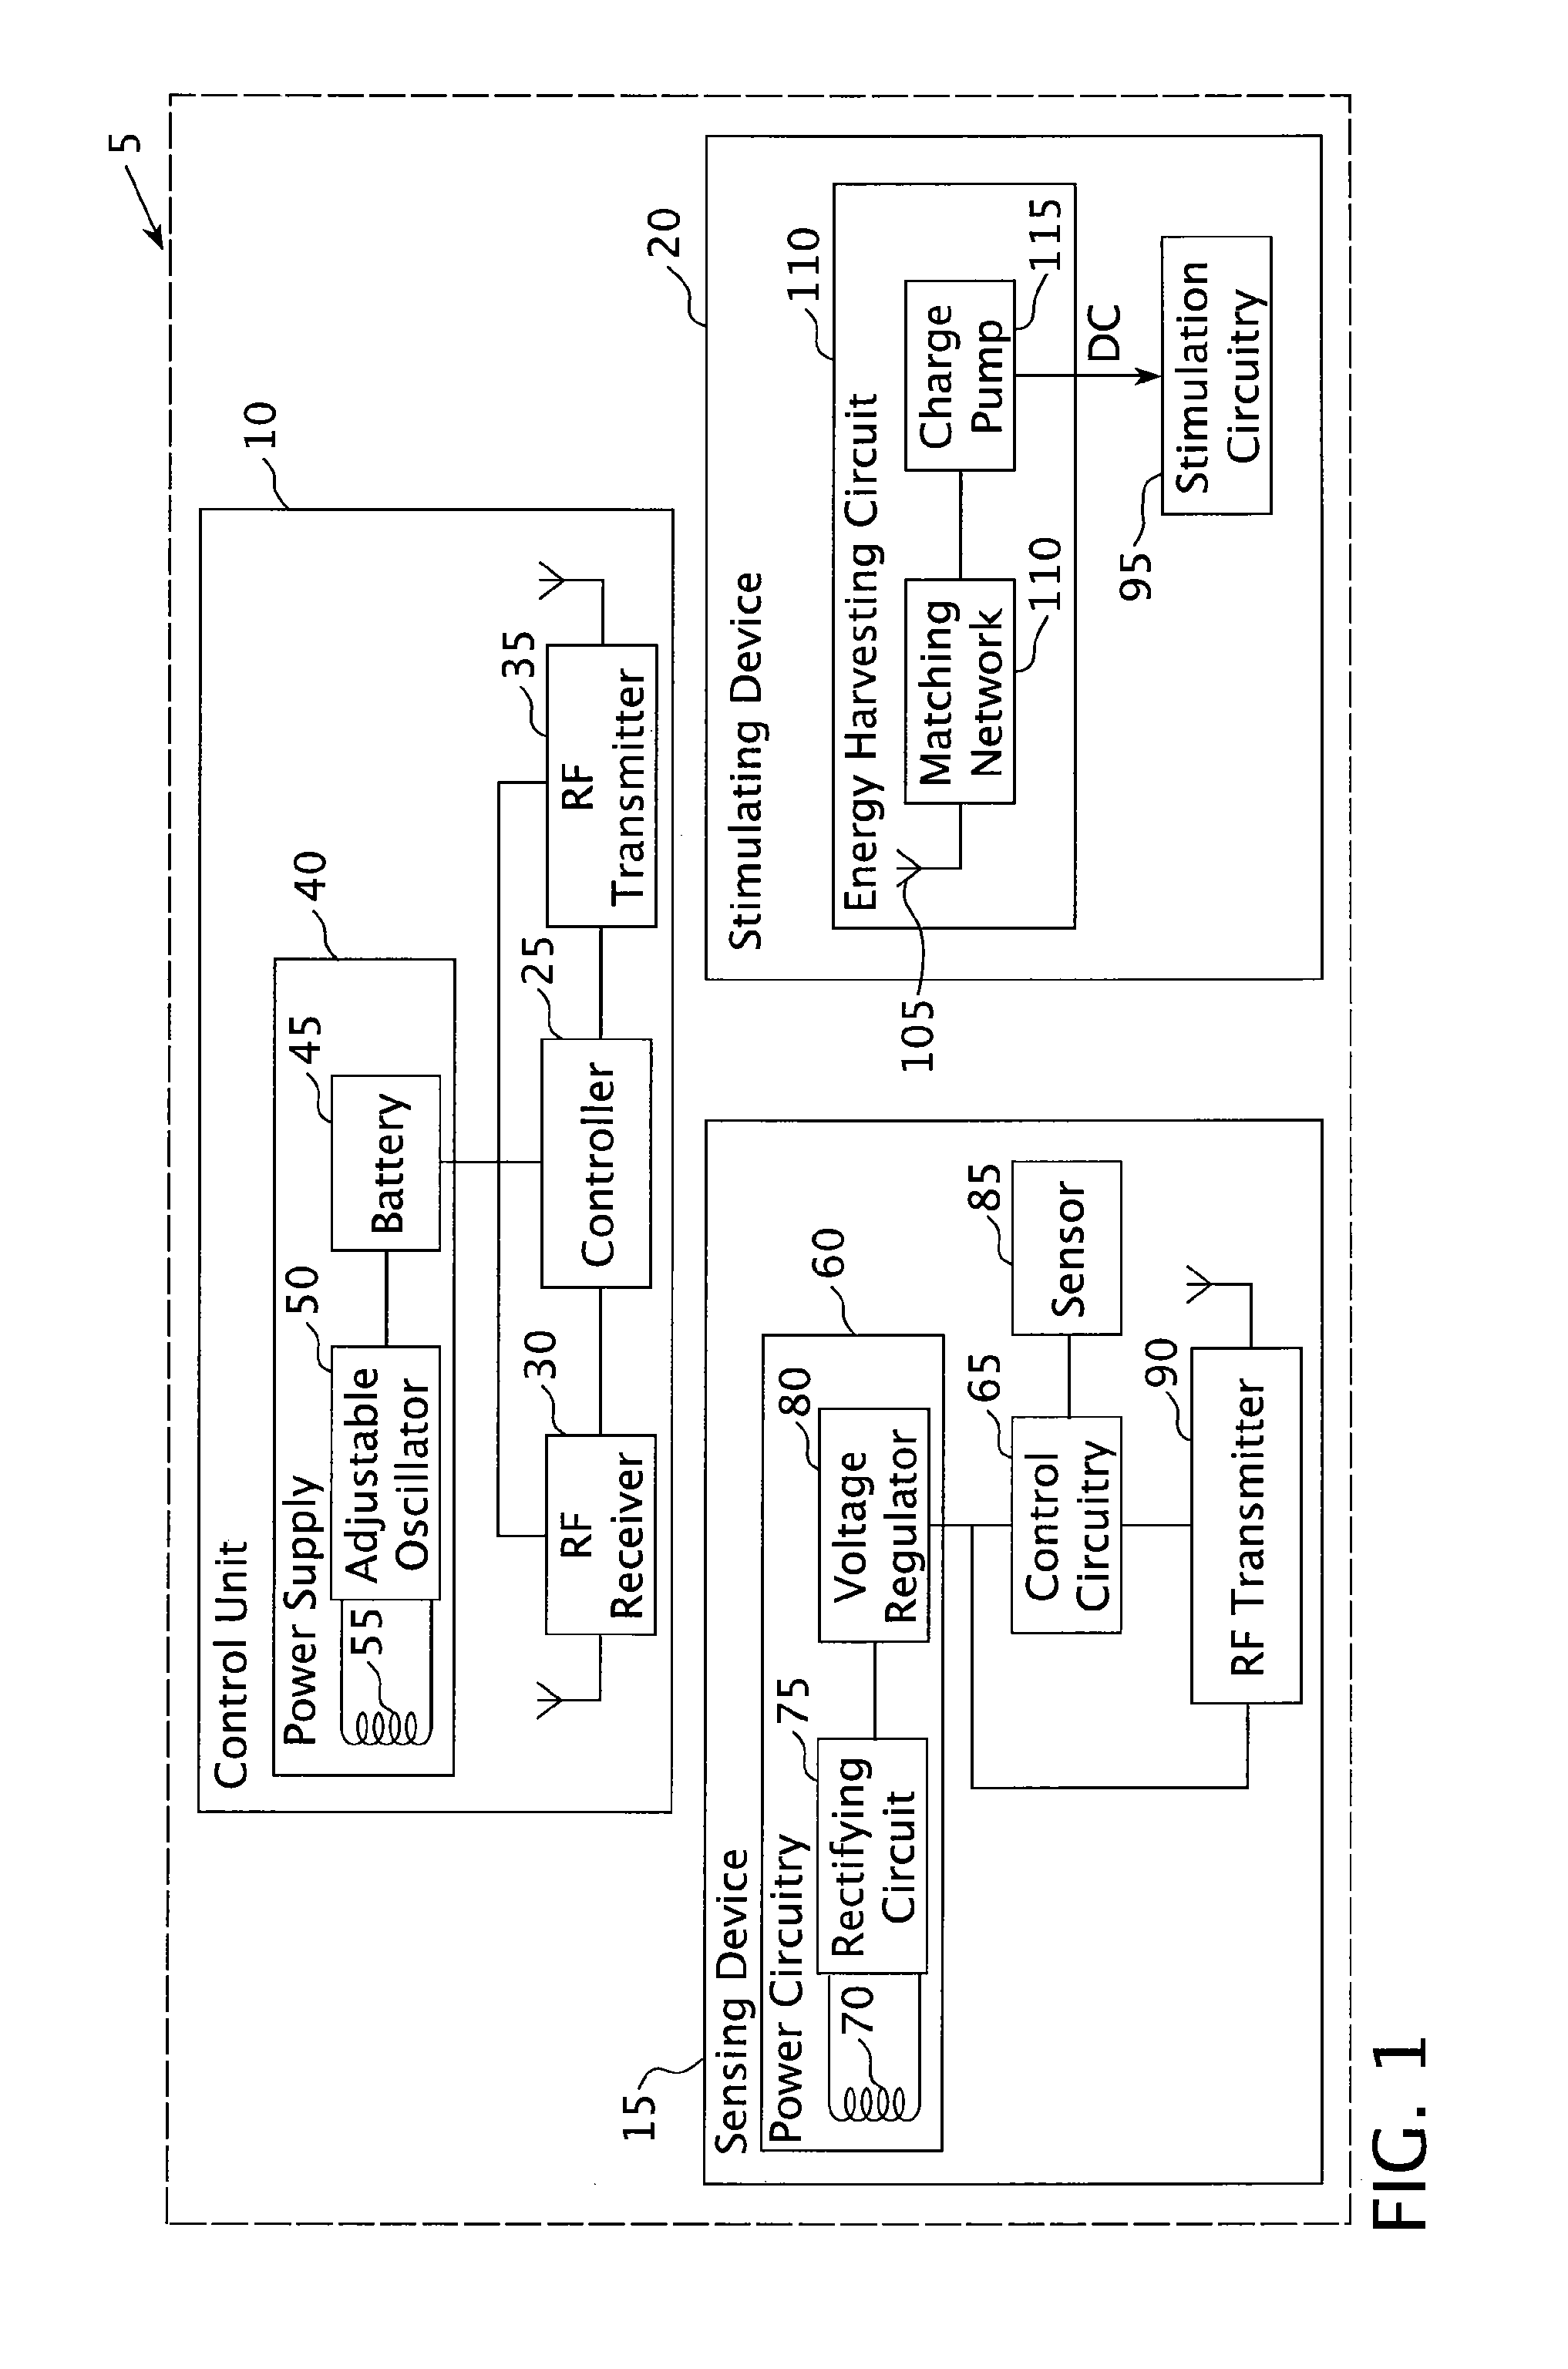 Method and apparatus for stimulating a denervated muscle